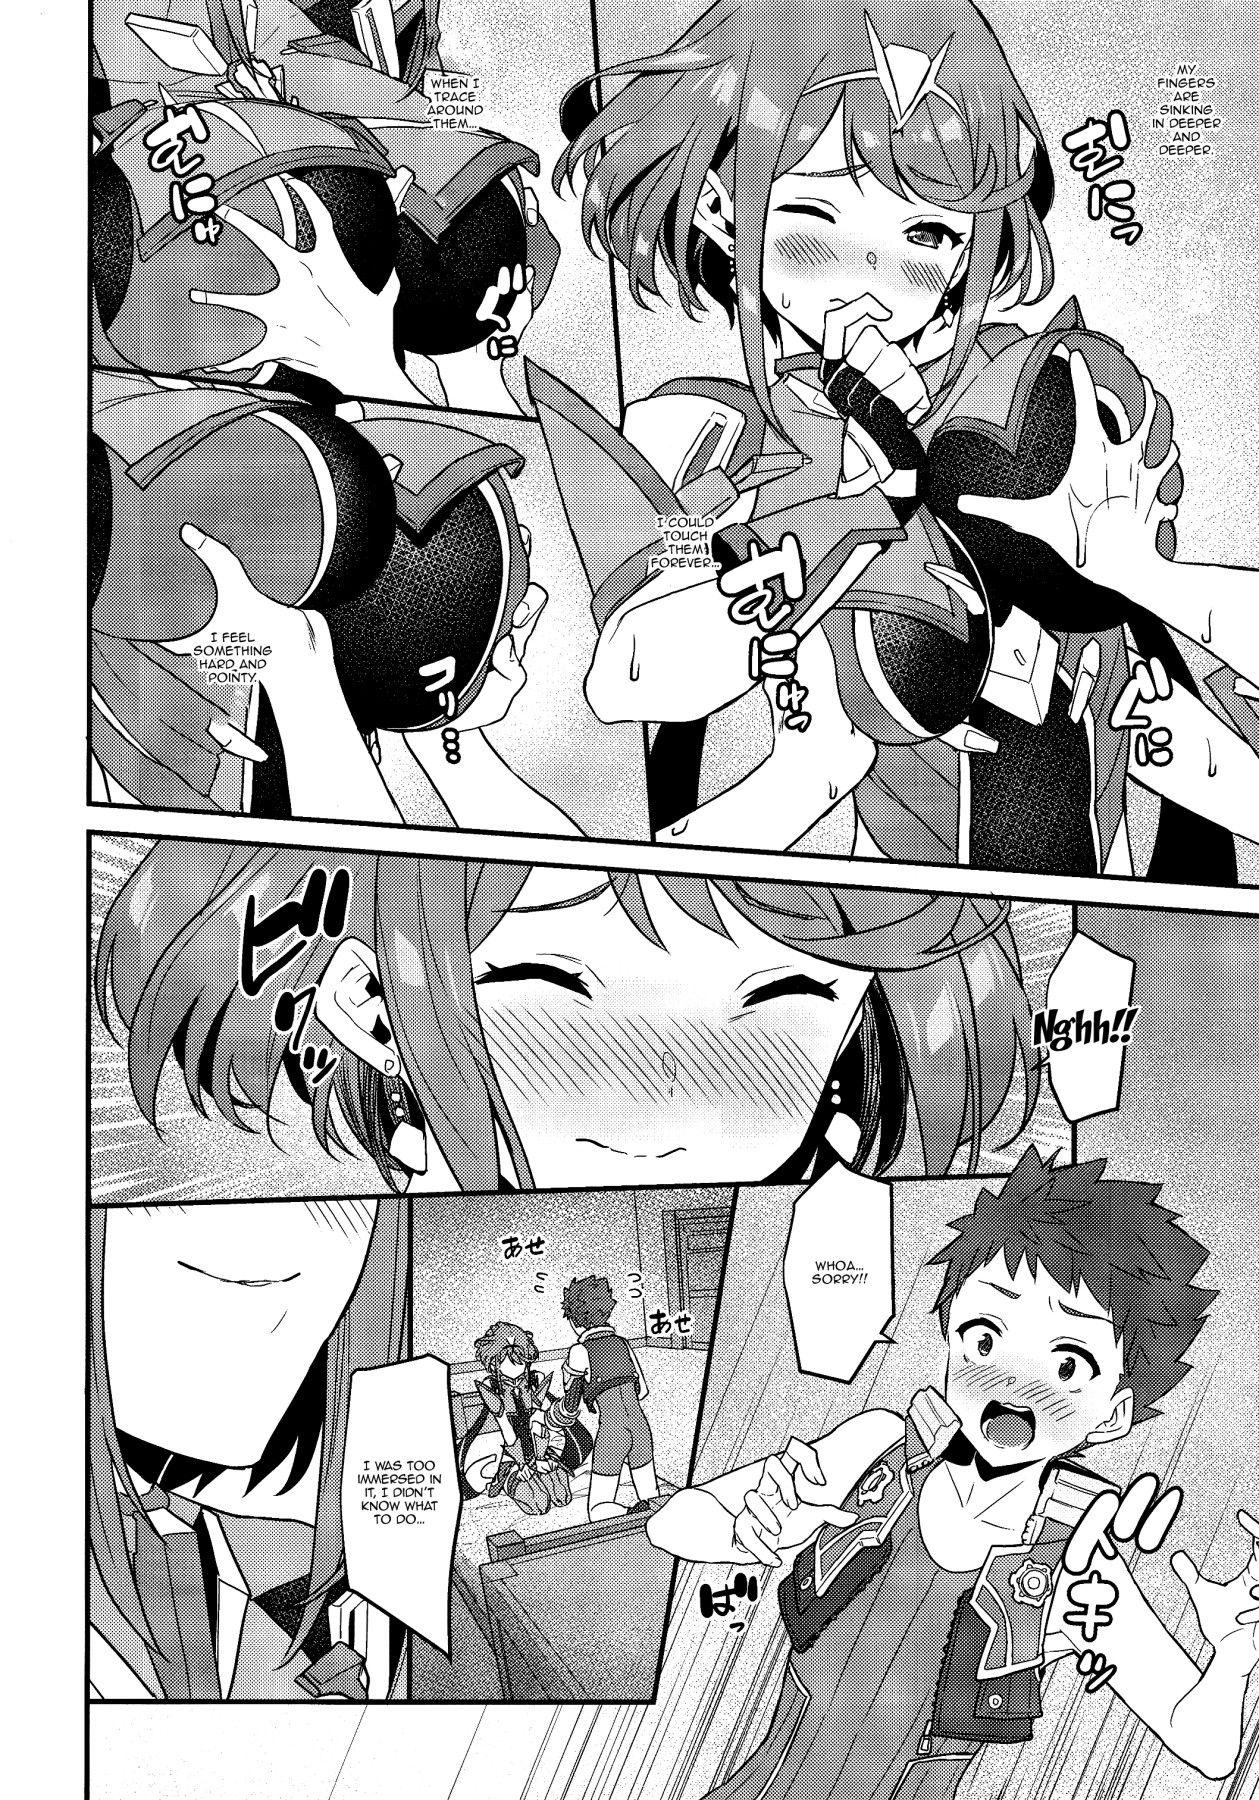 Cheerleader Chouyou no Naka e to | In The Morning Light - Xenoblade chronicles 2 Officesex - Page 11